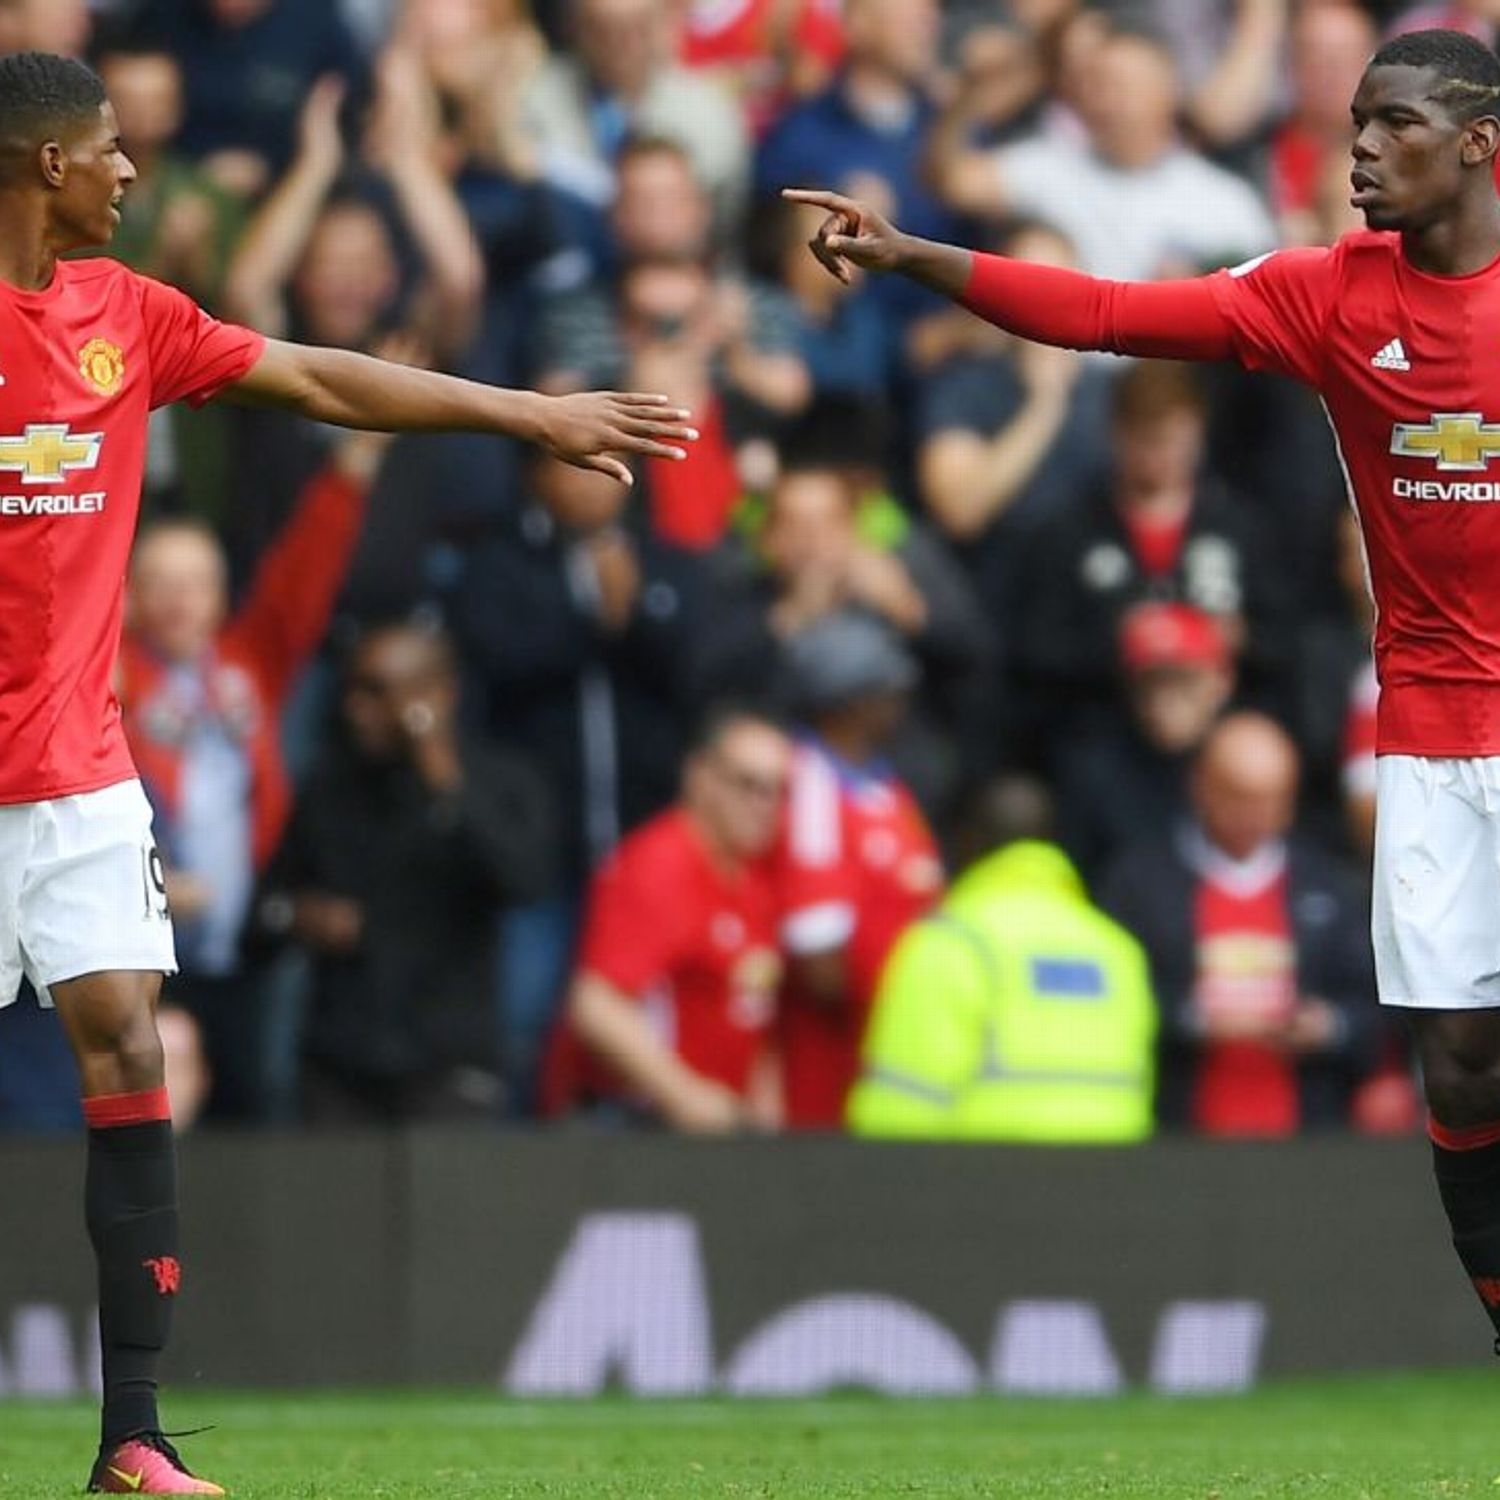 Marcus Rashford 'looking to build momentum' with Manchester United